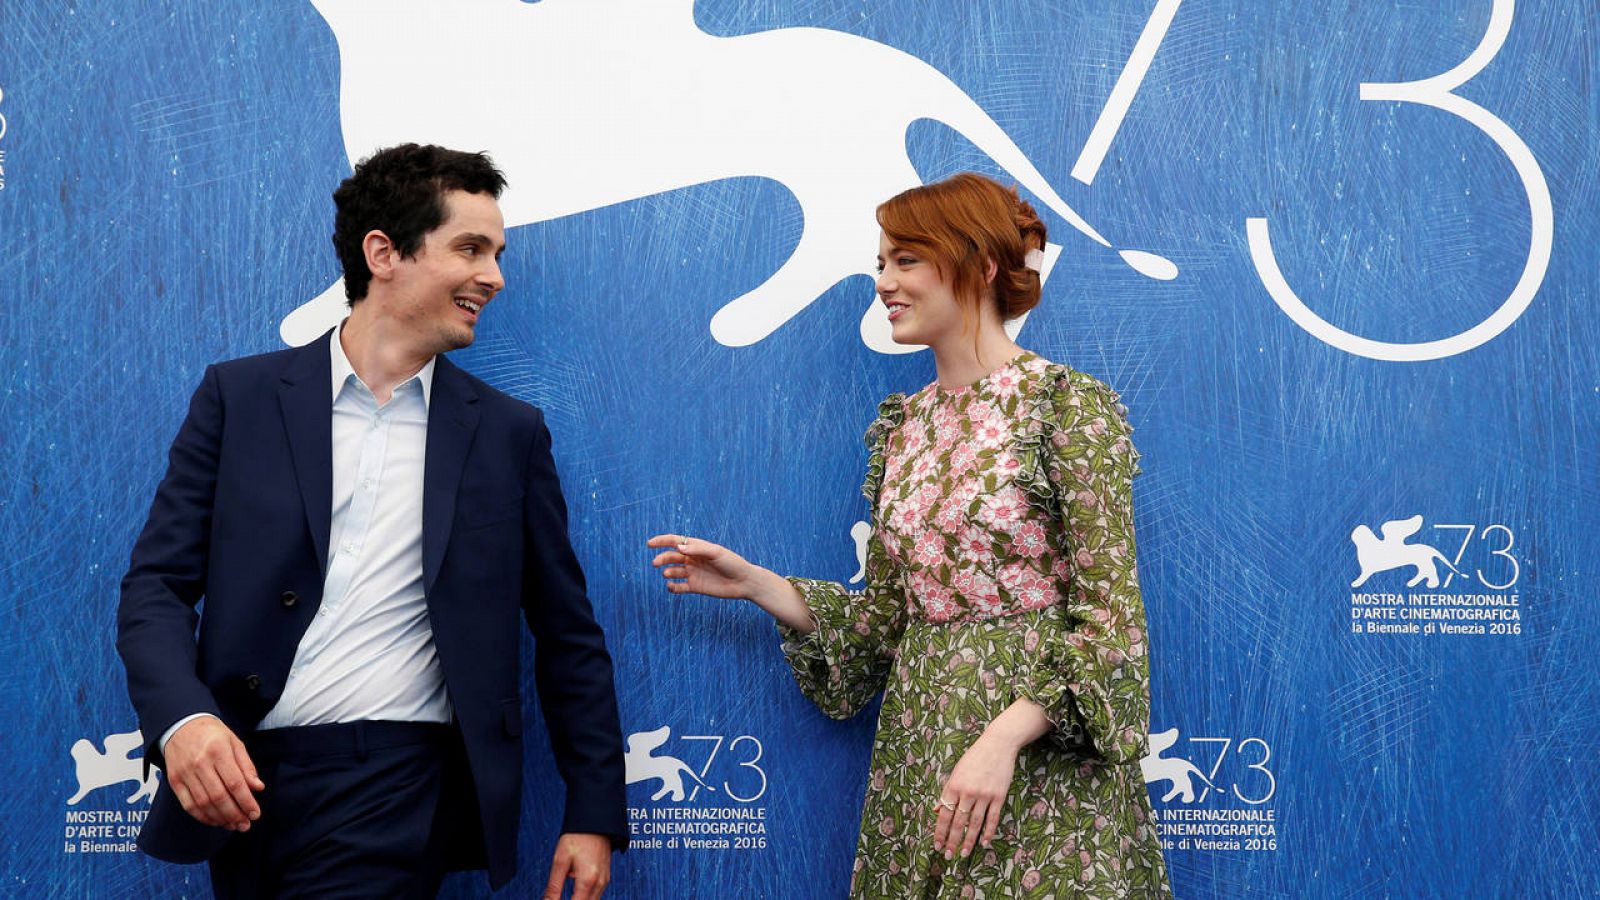 Director Damien Chazelle and actress Emma Stone attend the photocall for the movie "La La Land"  at the 73rd Venice Film Festival in Venice